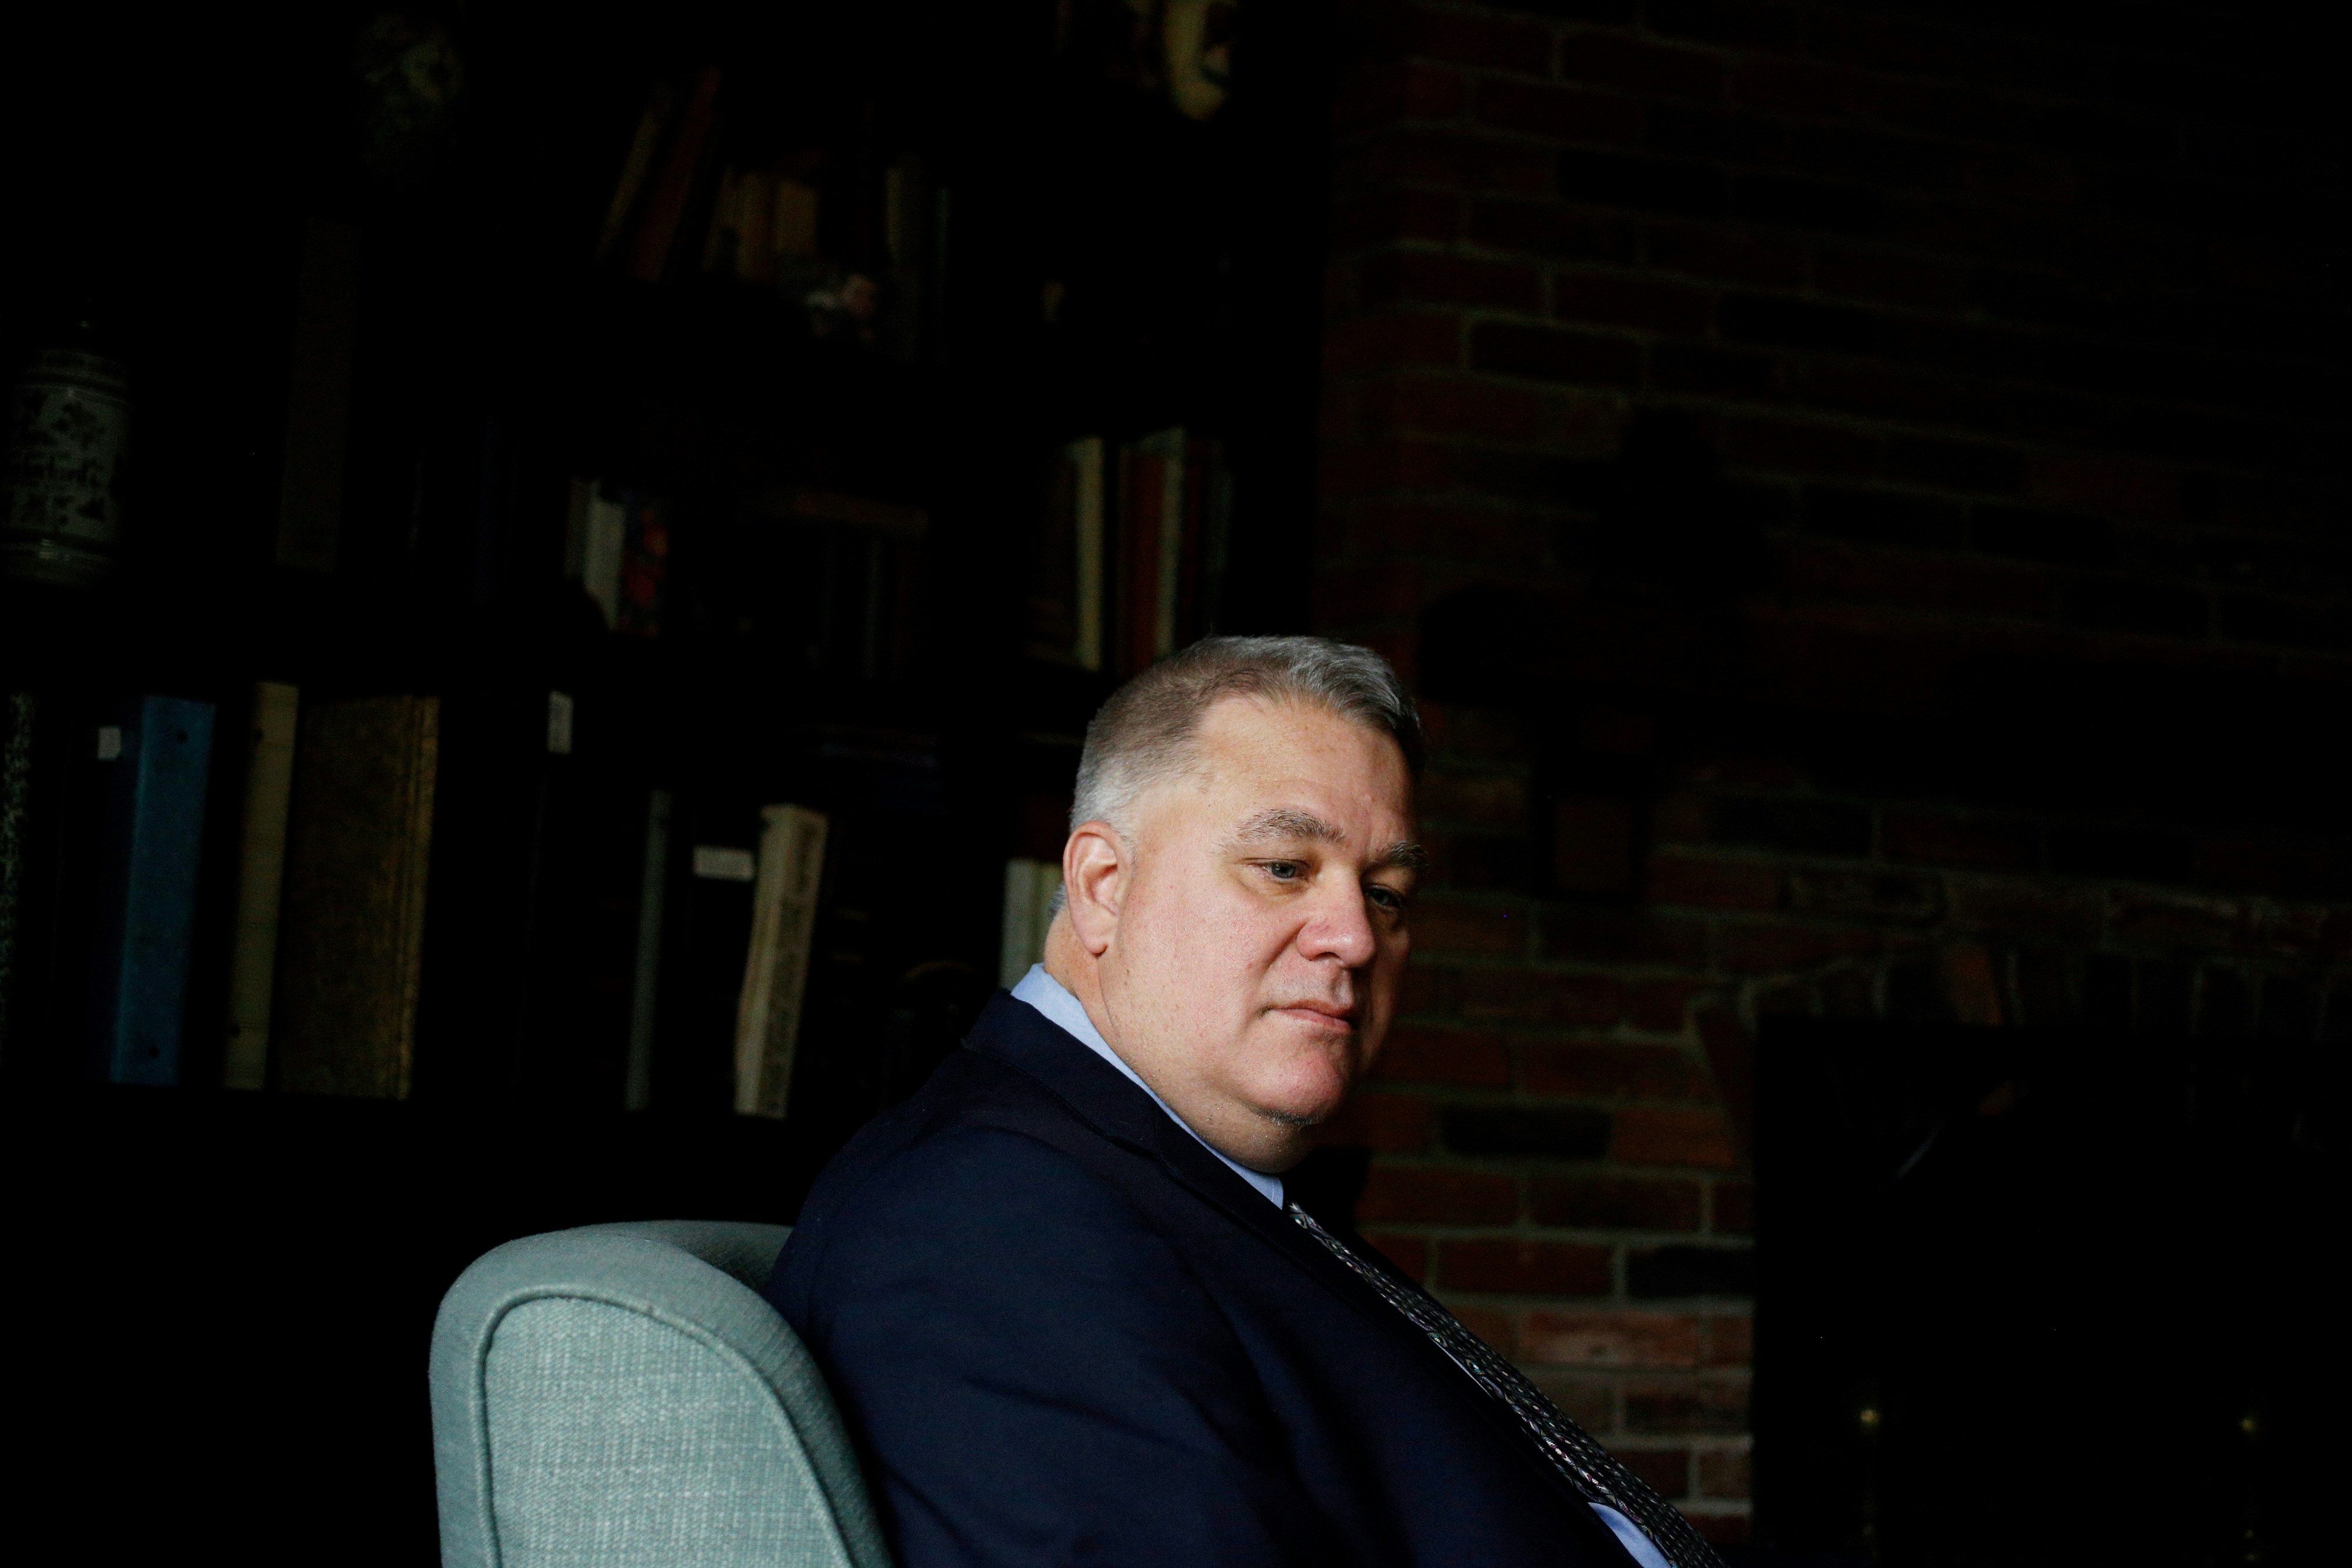 Former Kentucky Retirement Systems trustee Chris Tobe sits for a portrait at his parents' house in Floyds Knobs, Indiana, U.S., on Friday, Oct. 19, 2018. Photographer: Luke Sharrett for The Intercept